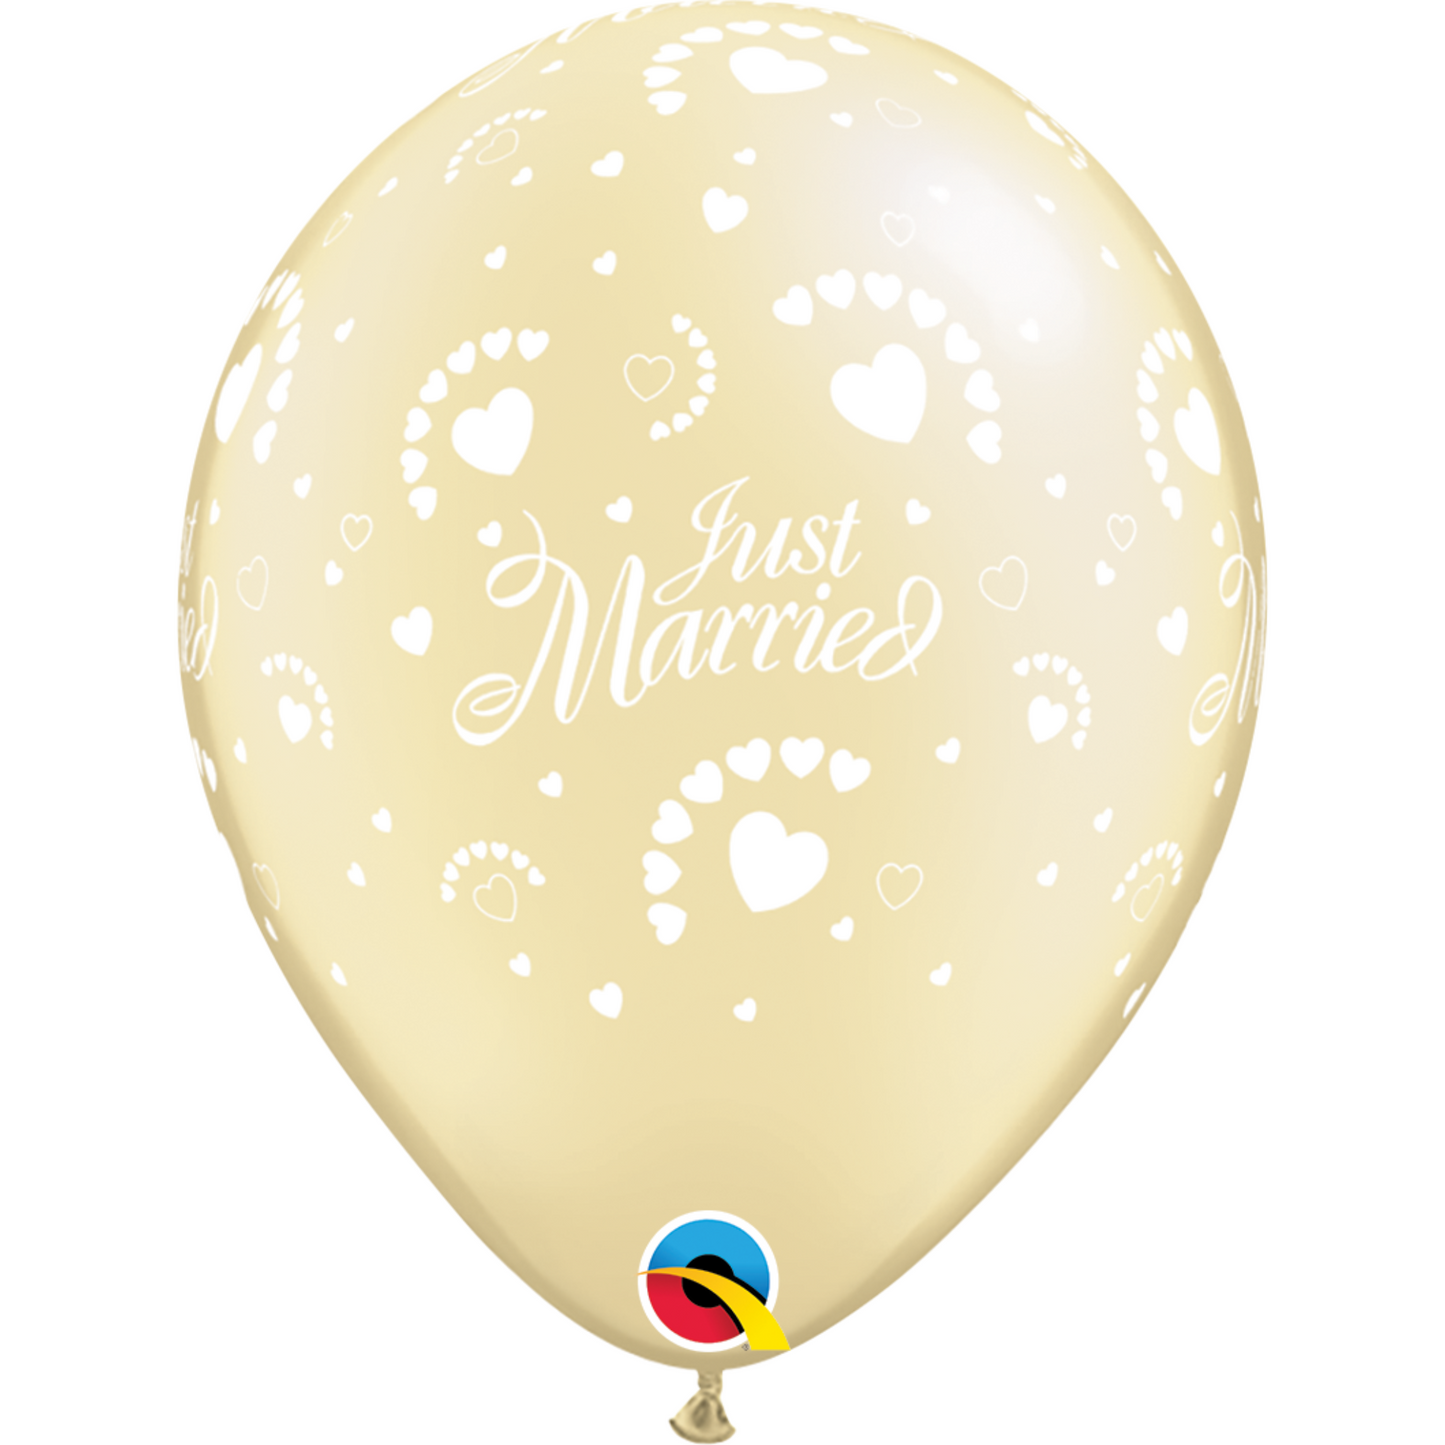 92027 - 25 X 11" PEARL IVORY LATEX BALLOONS JUST MARRIED HEARTS AROUND